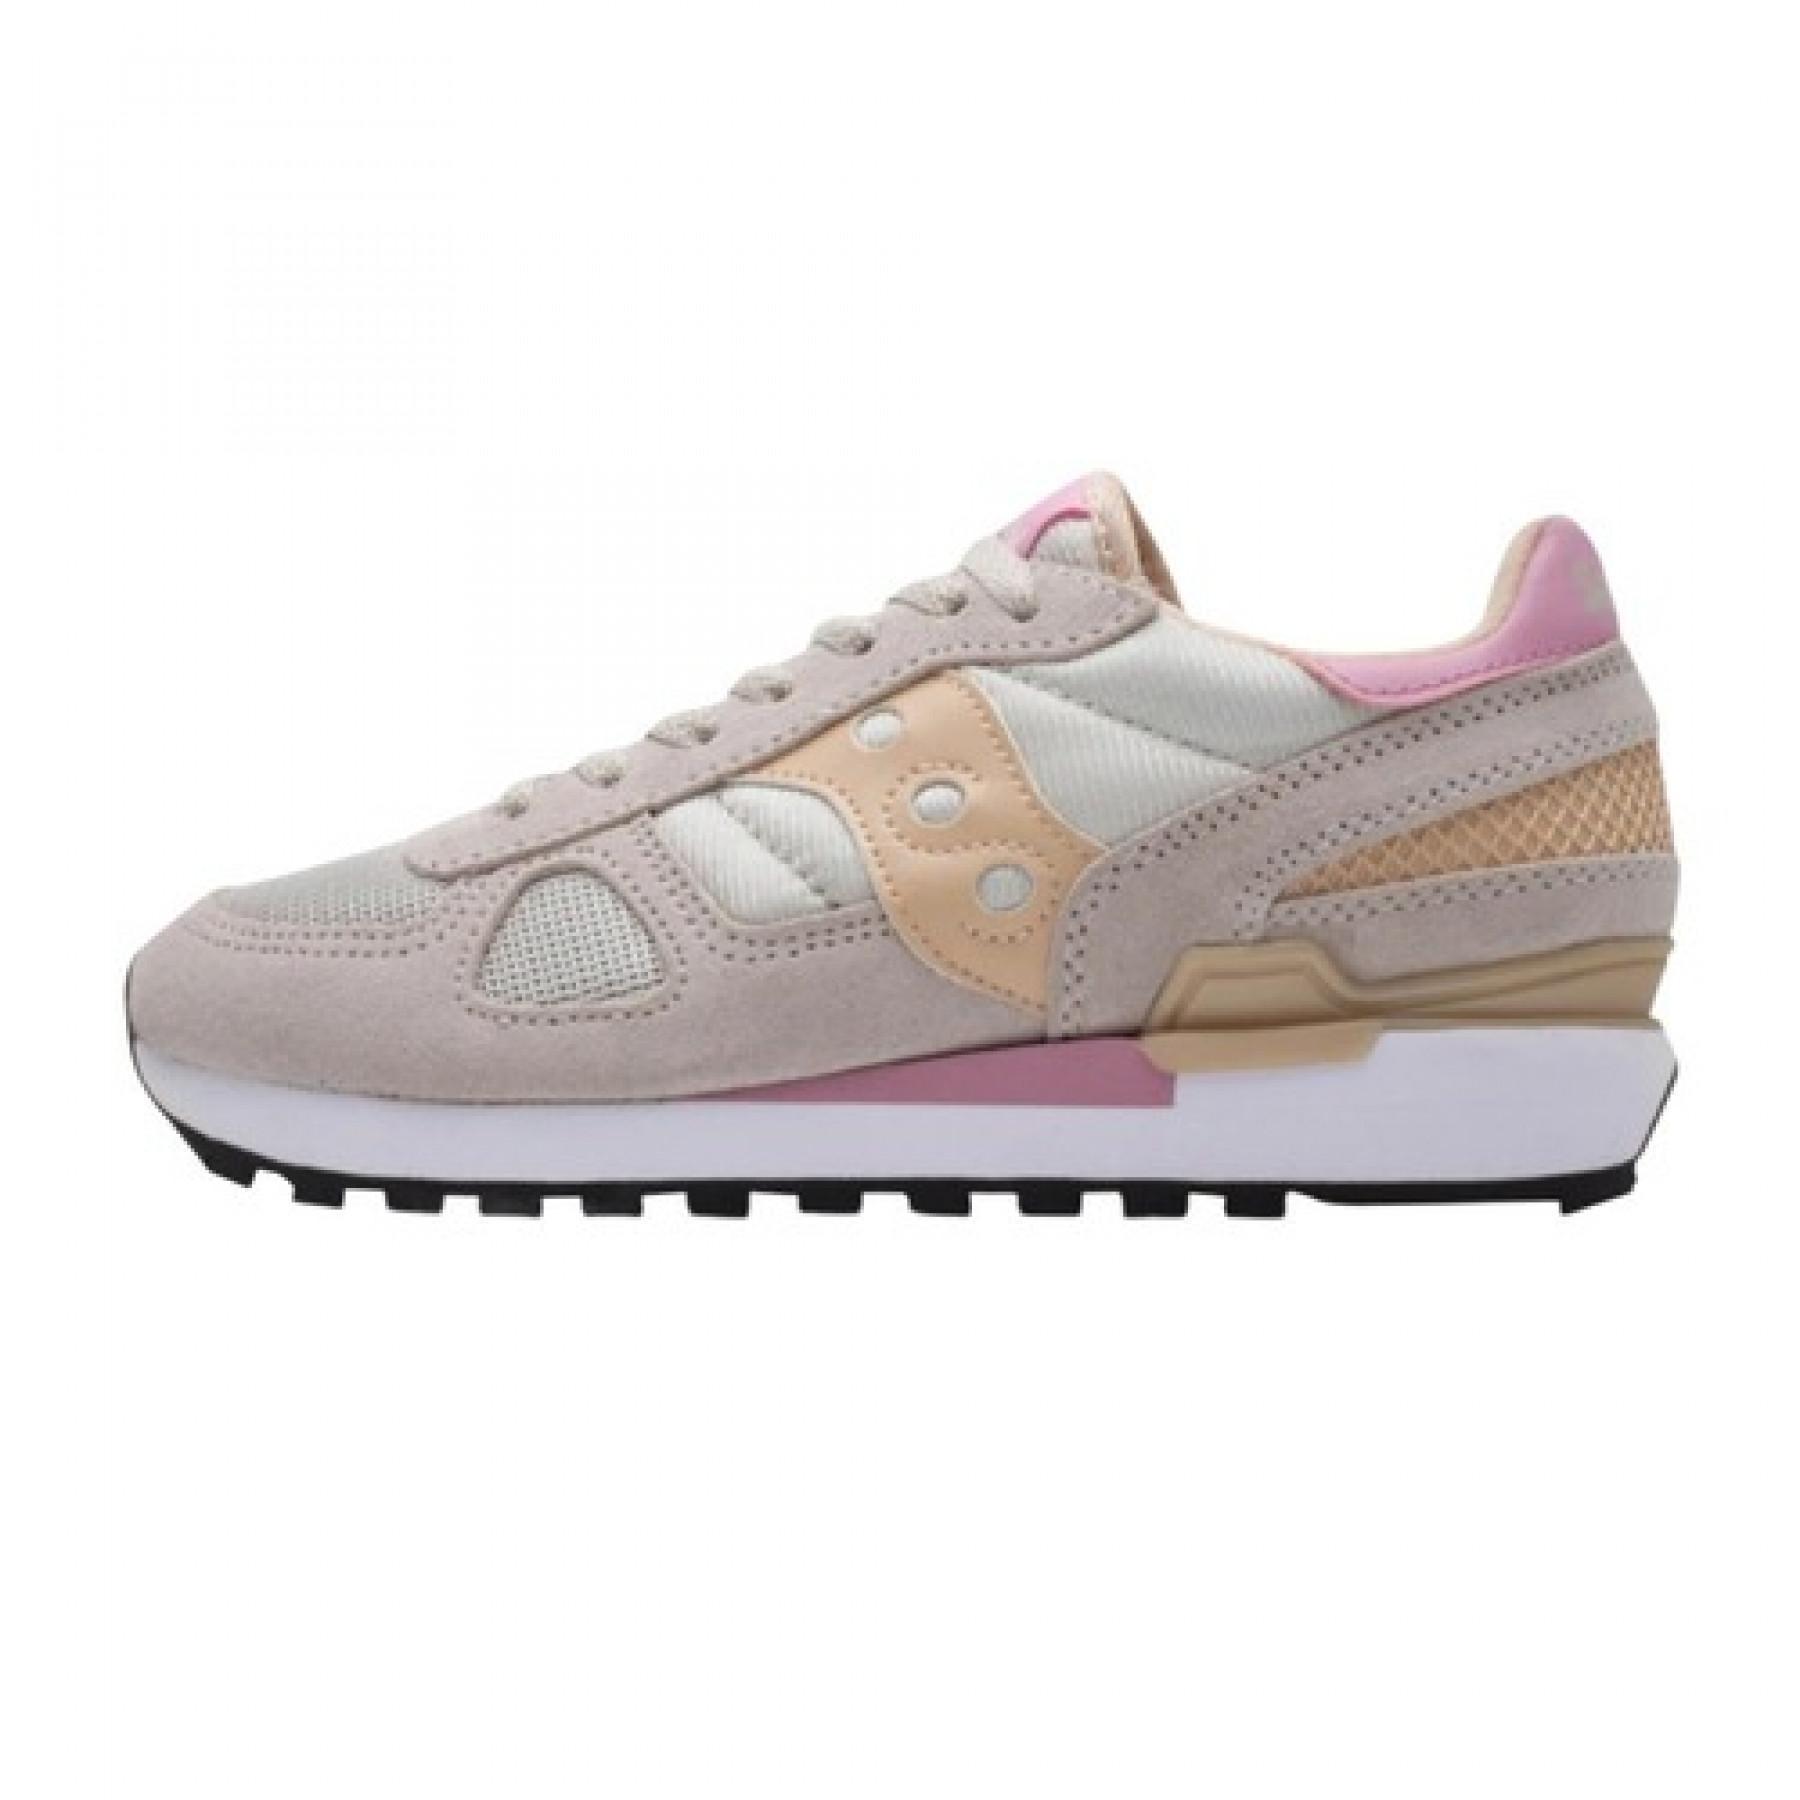 saucony chaussures homme brun